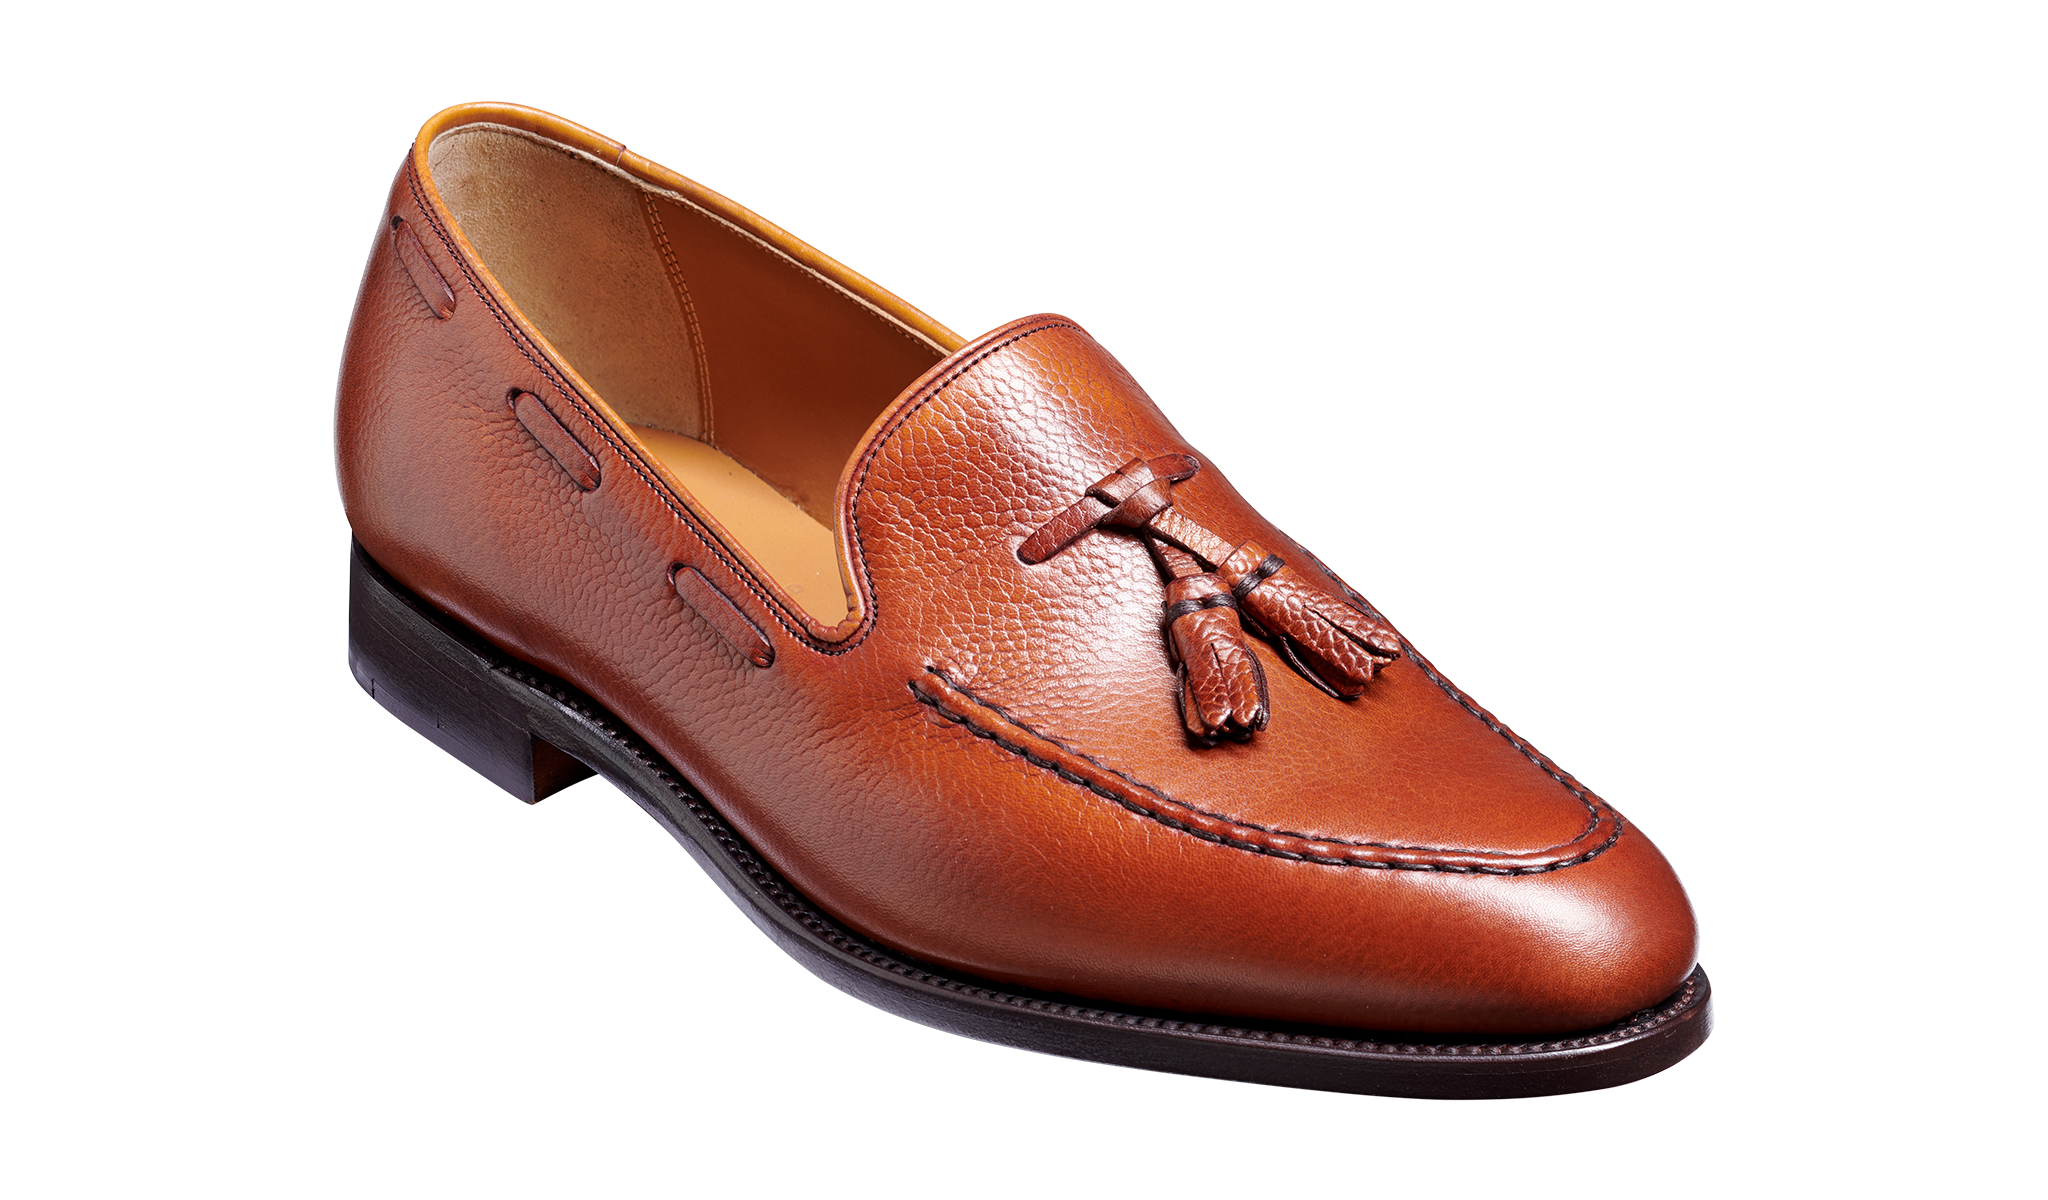 Newborough - A brown handmade leather loafers for men by Barker Shoes.